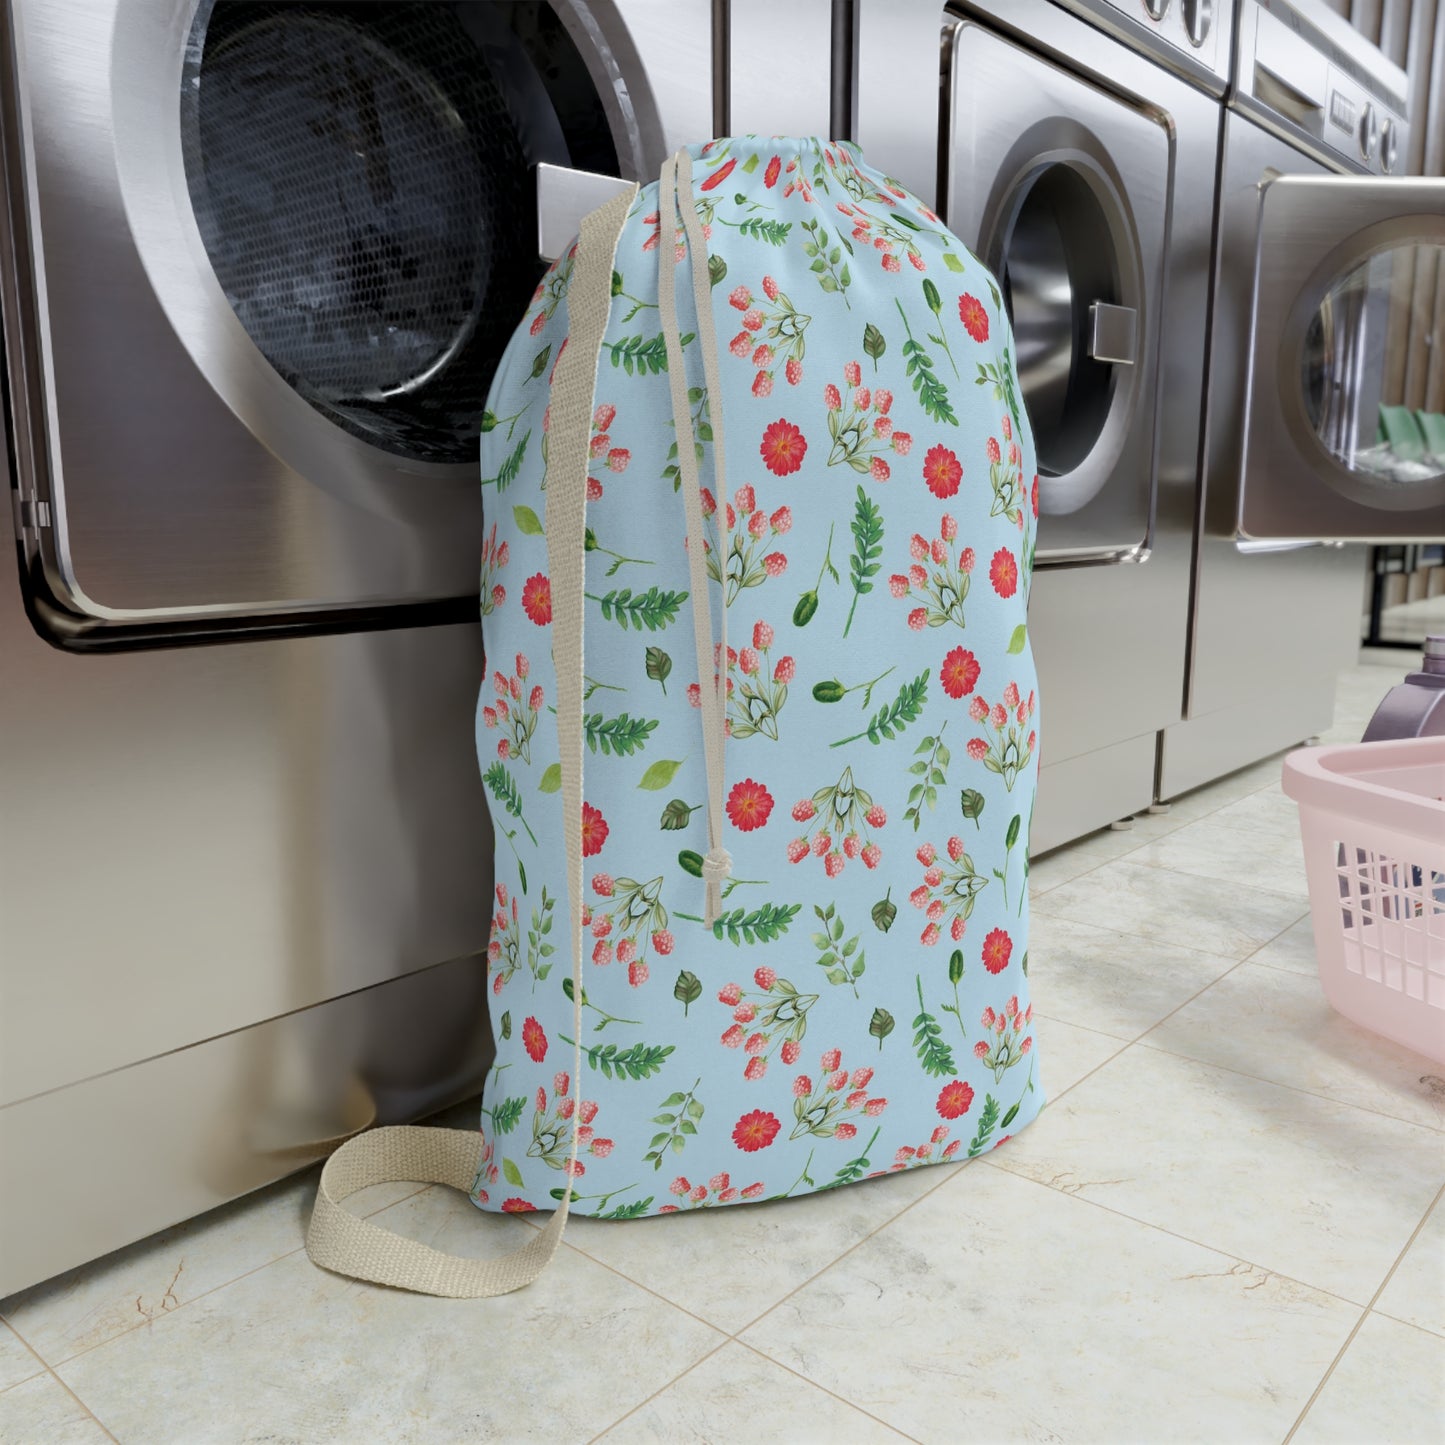 Berries and Floral Laundry Bag